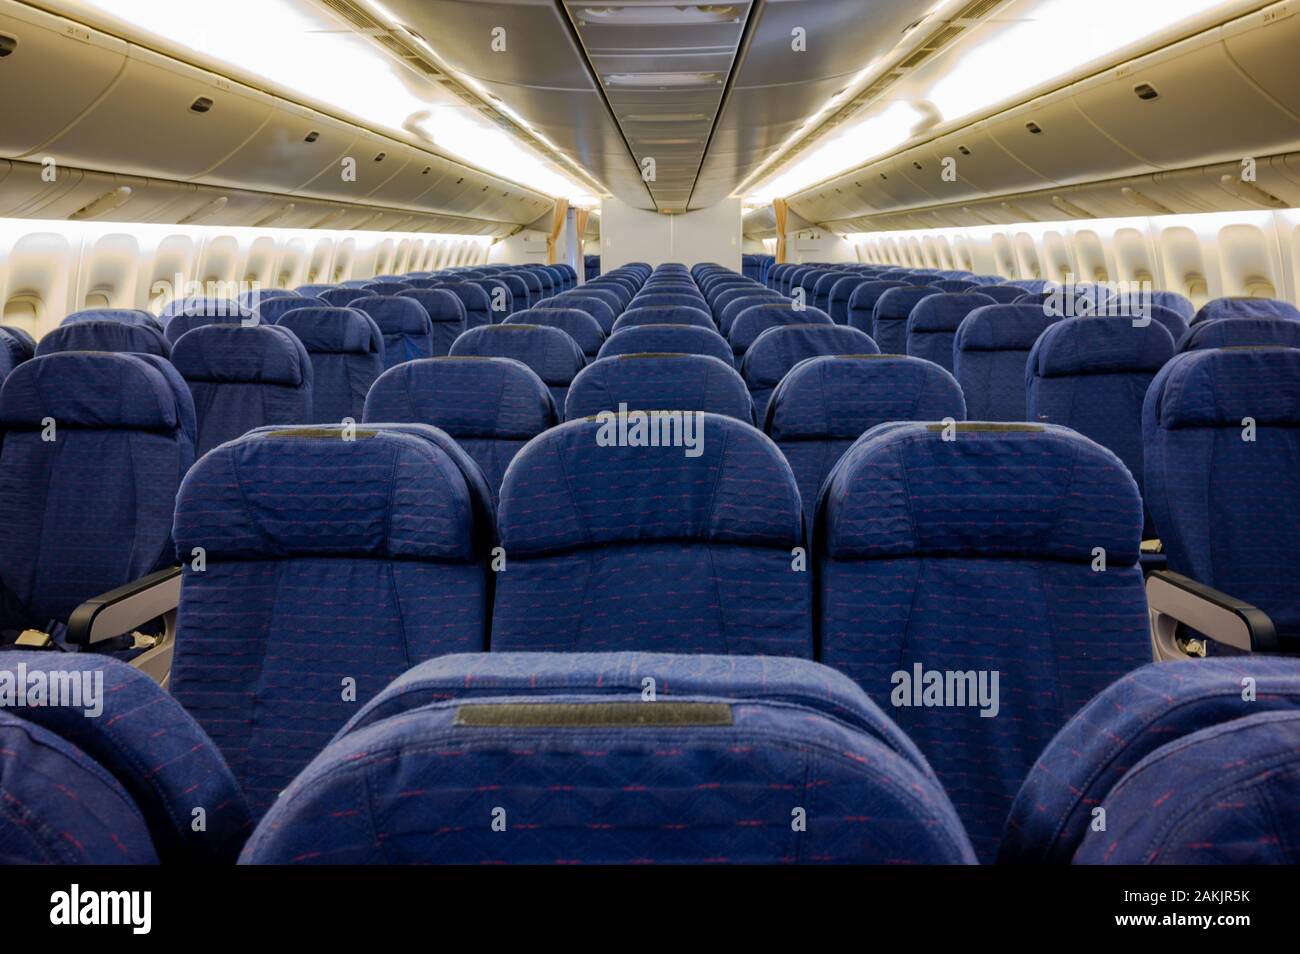 Large wide-body commercial aircraft coach class with no passengers and empty seats Stock Photo